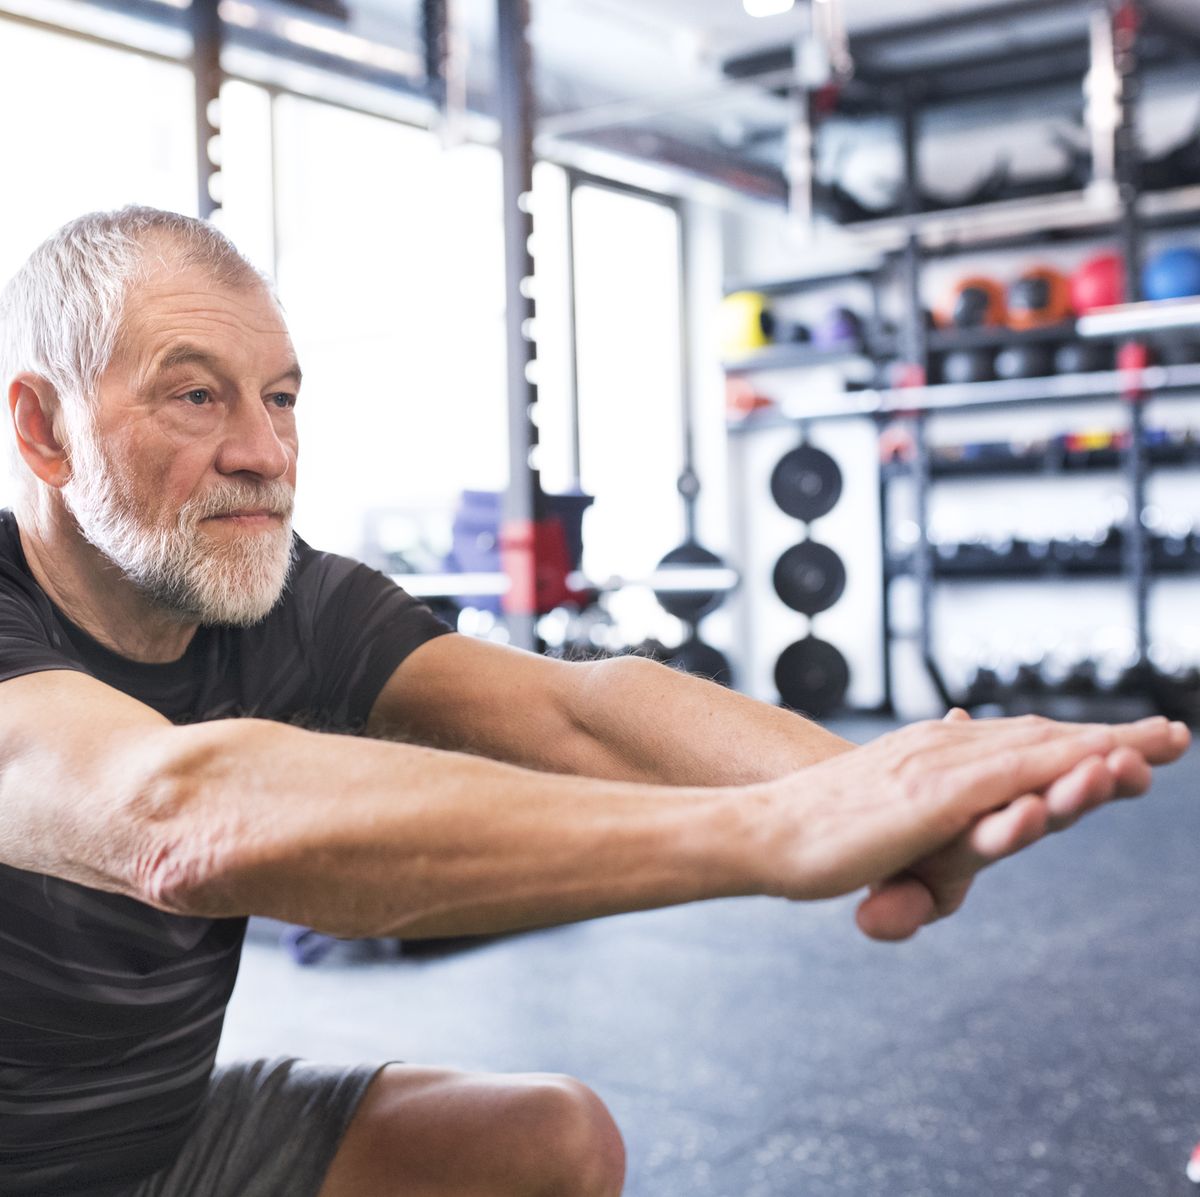 5 Fitness Tips for Men to Stay in Shape from Before to After 50